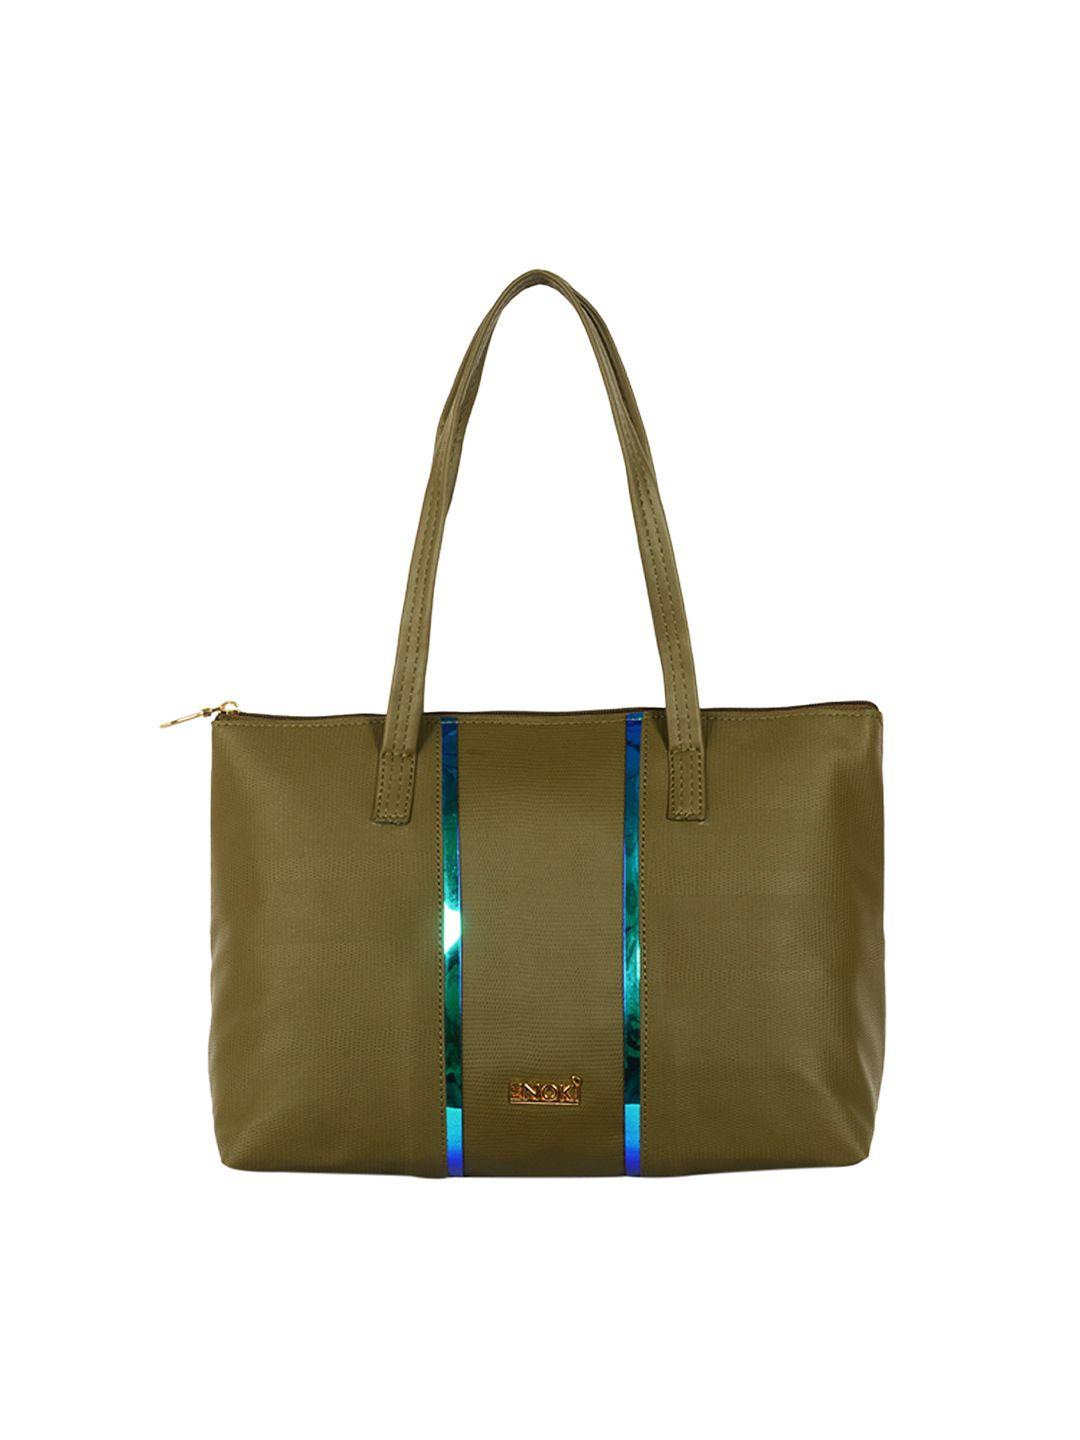 enoki olive green structured tote bag with tasselled